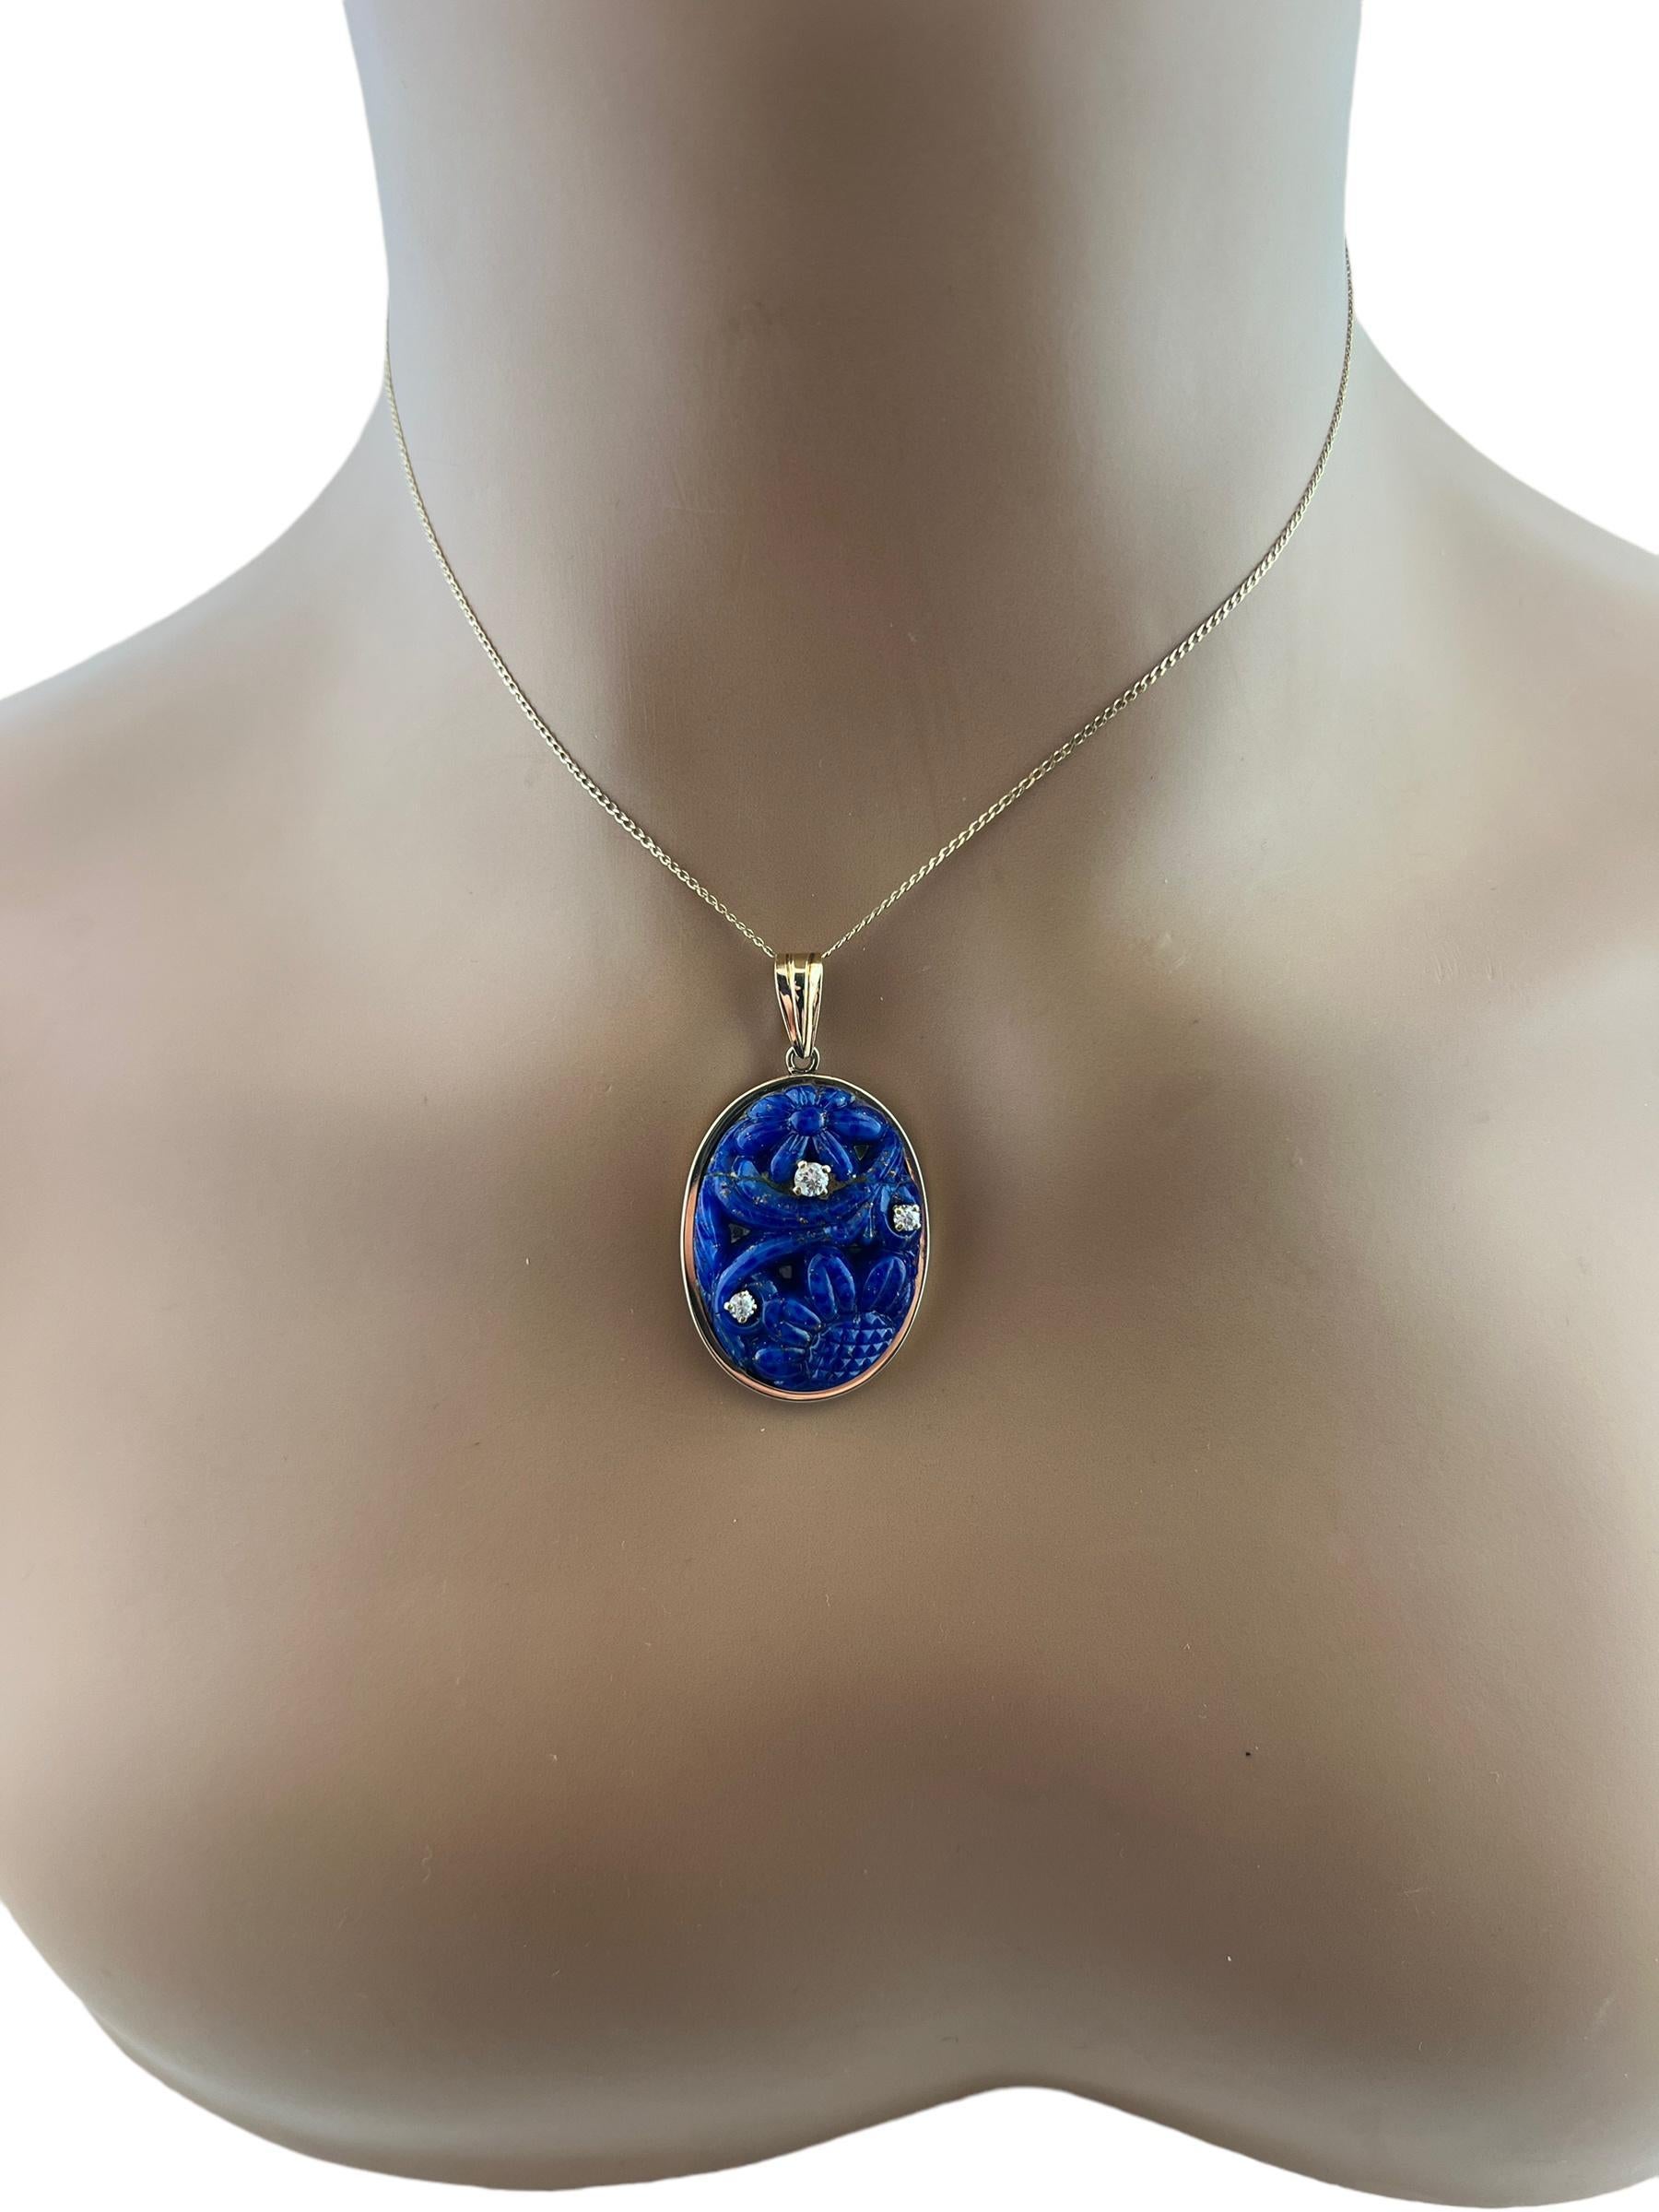 Antique 14K Yellow Gold Carved Lapis Lazuli and Diamond Pendant #15999 For Sale 4